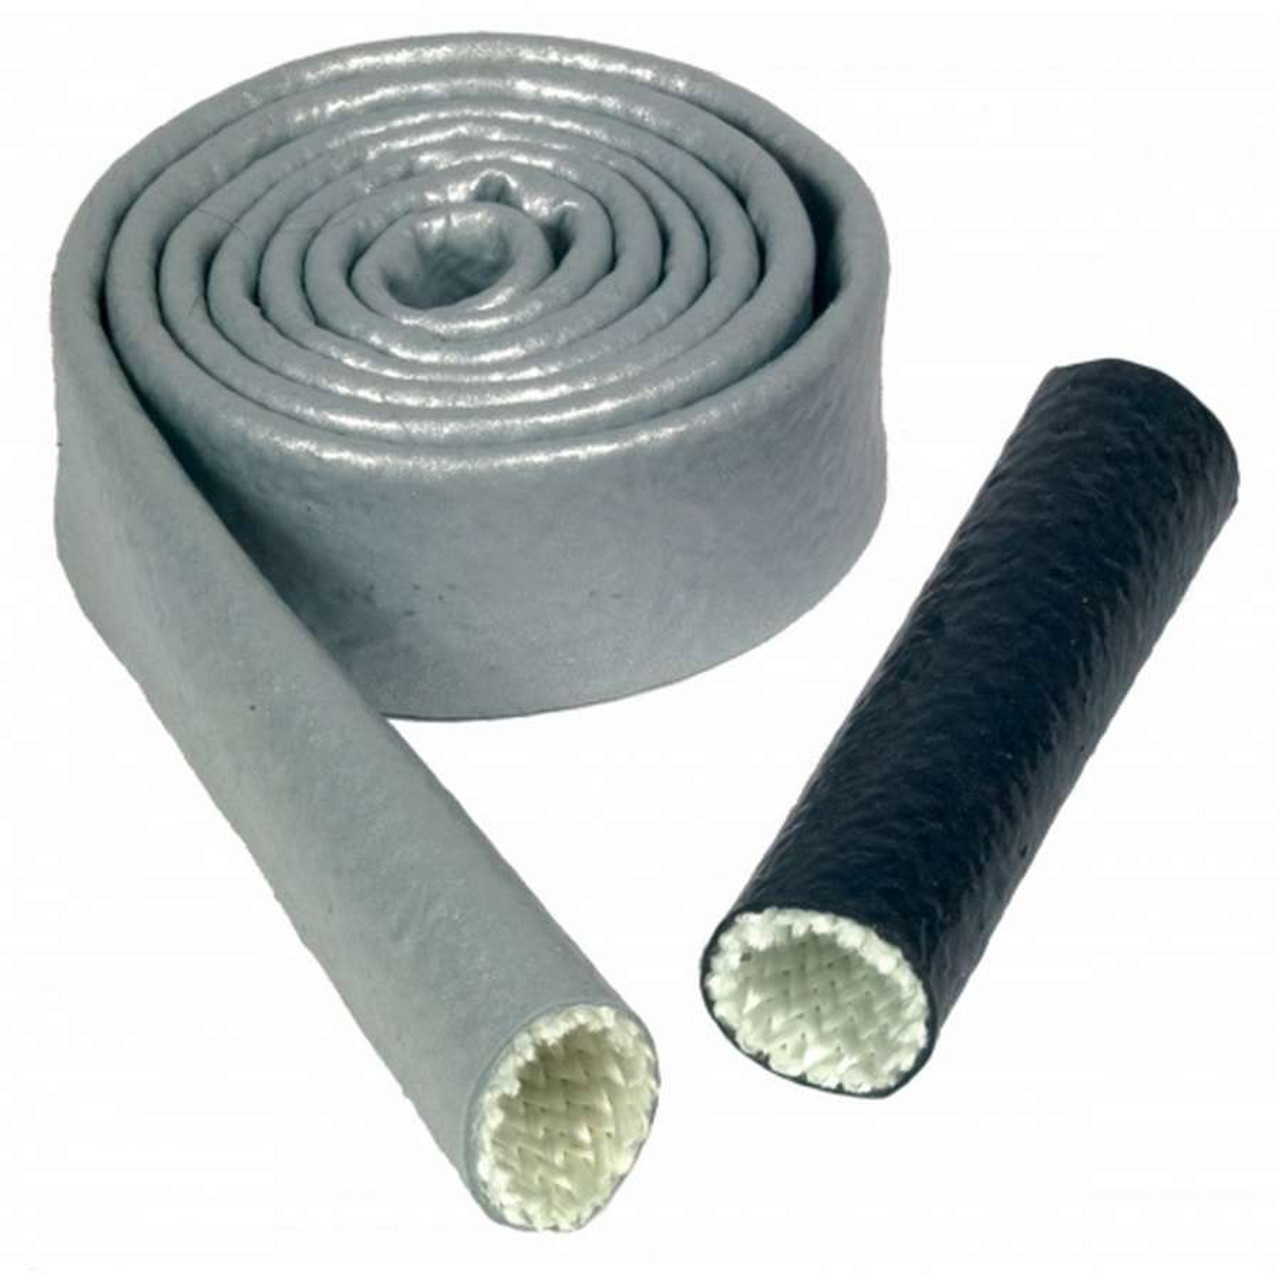 Thermo-Tec Heat Sleeve 1in x 3' Silver - THE18101